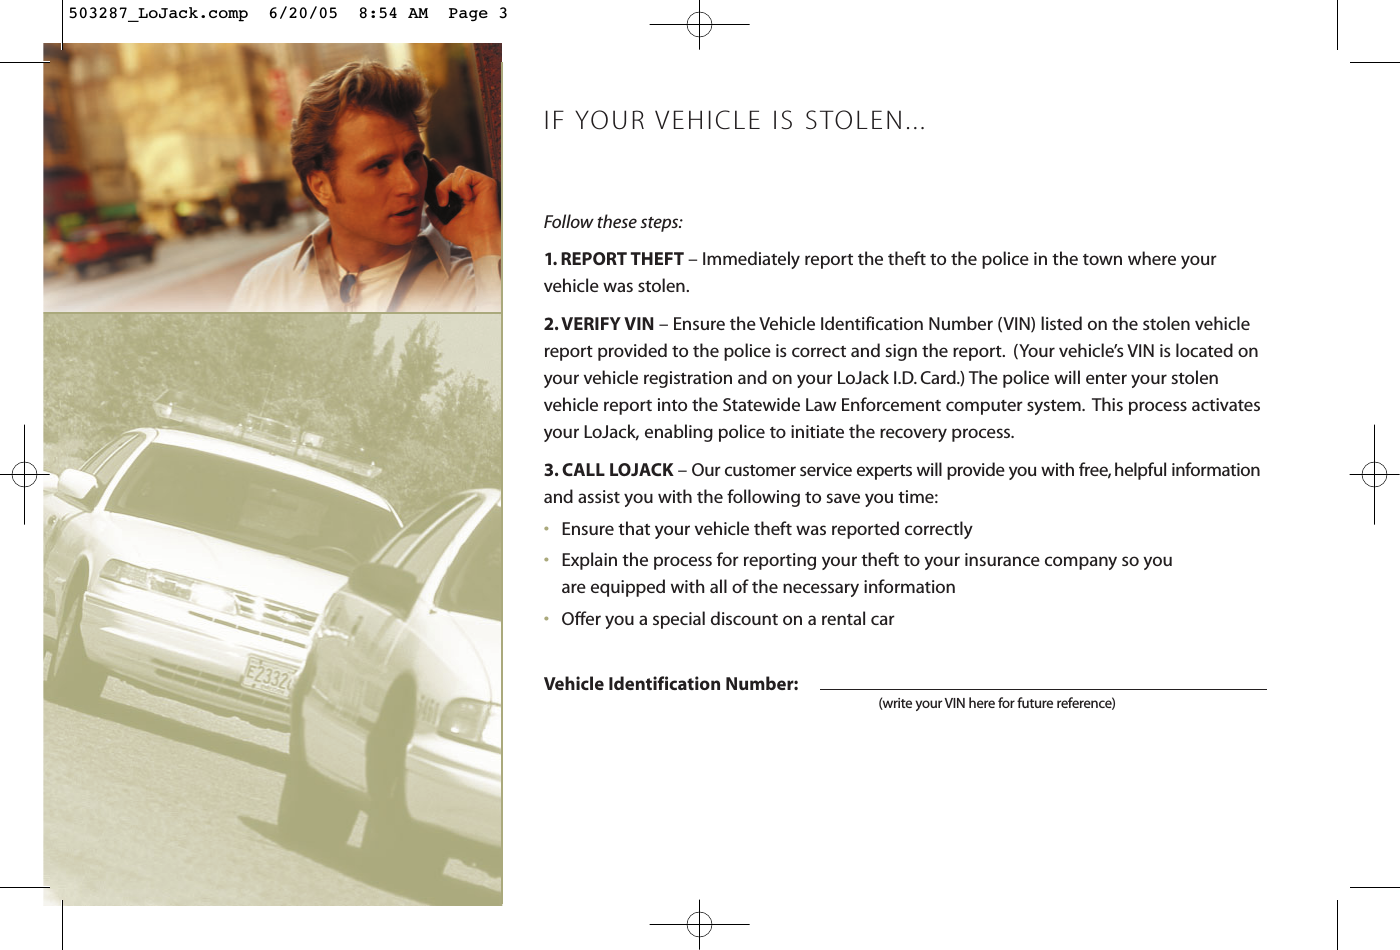 Follow these steps:1. REPORT THEFT – Immediately report the theft to the police in the town where your vehicle was stolen.2. VERIFY VIN – Ensure the Vehicle Identification Number (VIN) listed on the stolen vehiclereport provided to the police is correct and sign the report. (Your vehicle’s VIN is located onyour vehicle registration and on your LoJack I.D. Card.) The police will enter your stolen vehicle report into the Statewide Law Enforcement computer system. This process activatesyour LoJack, enabling police to initiate the recovery process.3. CALL LOJACK – Our customer service experts will provide you with free, helpful informationand assist you with the following to save you time:•Ensure that your vehicle theft was reported correctly•Explain the process for reporting your theft to your insurance company so you are equipped with all of the necessary information•Offer you a special discount on a rental carVehicle Identification Number:(write your VIN here for future reference)IF YOUR VEHICLE IS STOLEN...503287_LoJack.comp  6/20/05  8:54 AM  Page 3